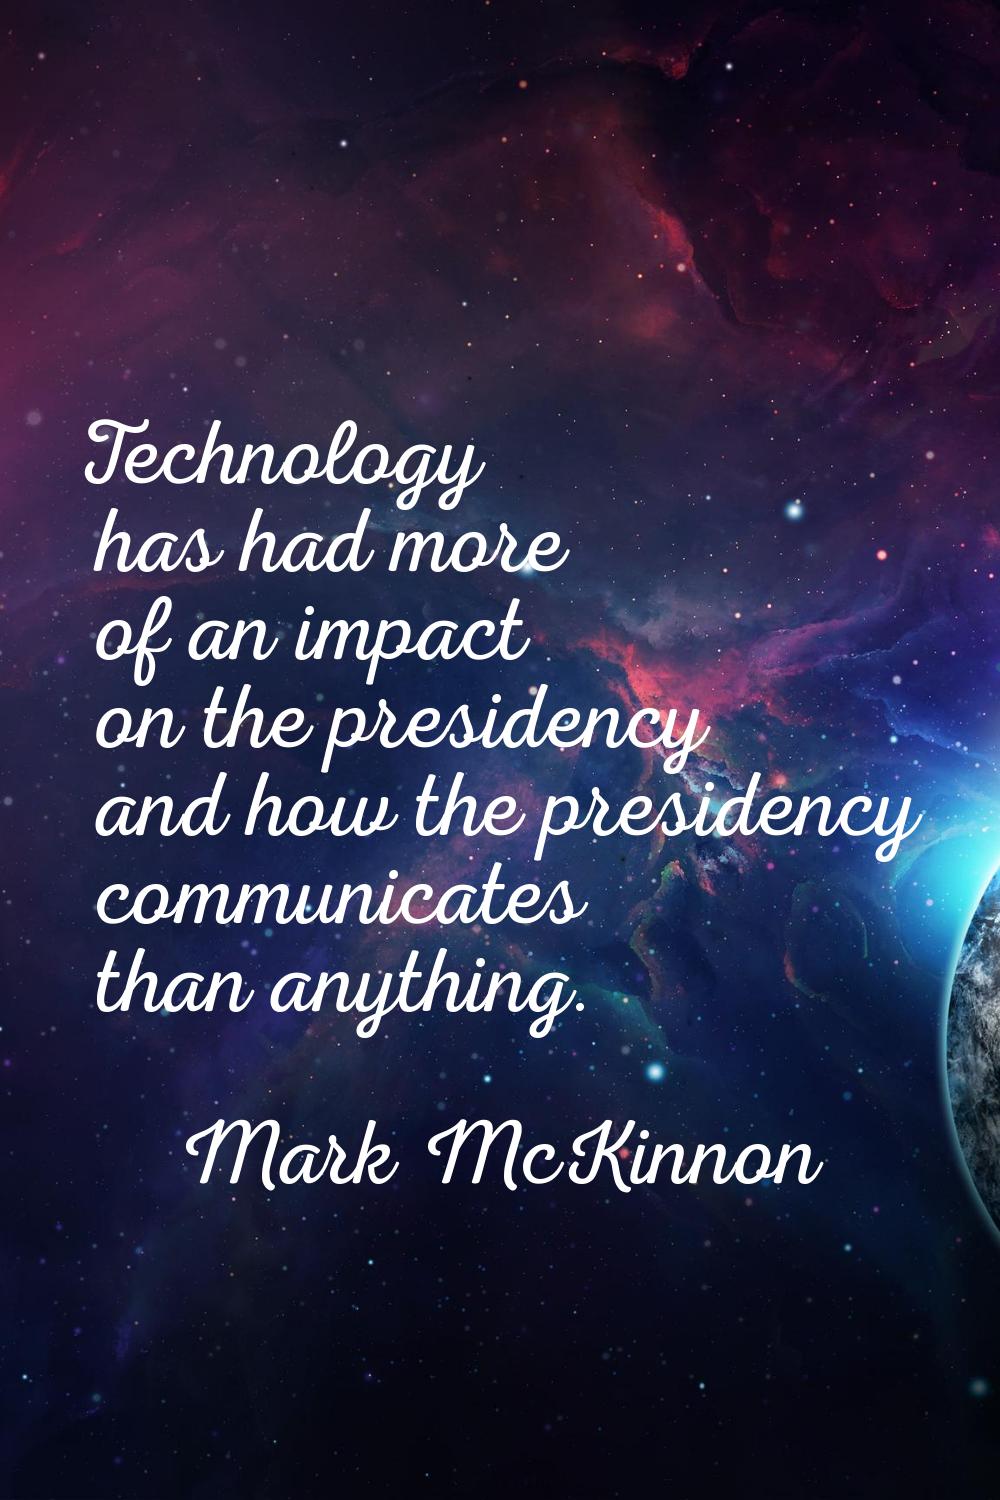 Technology has had more of an impact on the presidency and how the presidency communicates than any